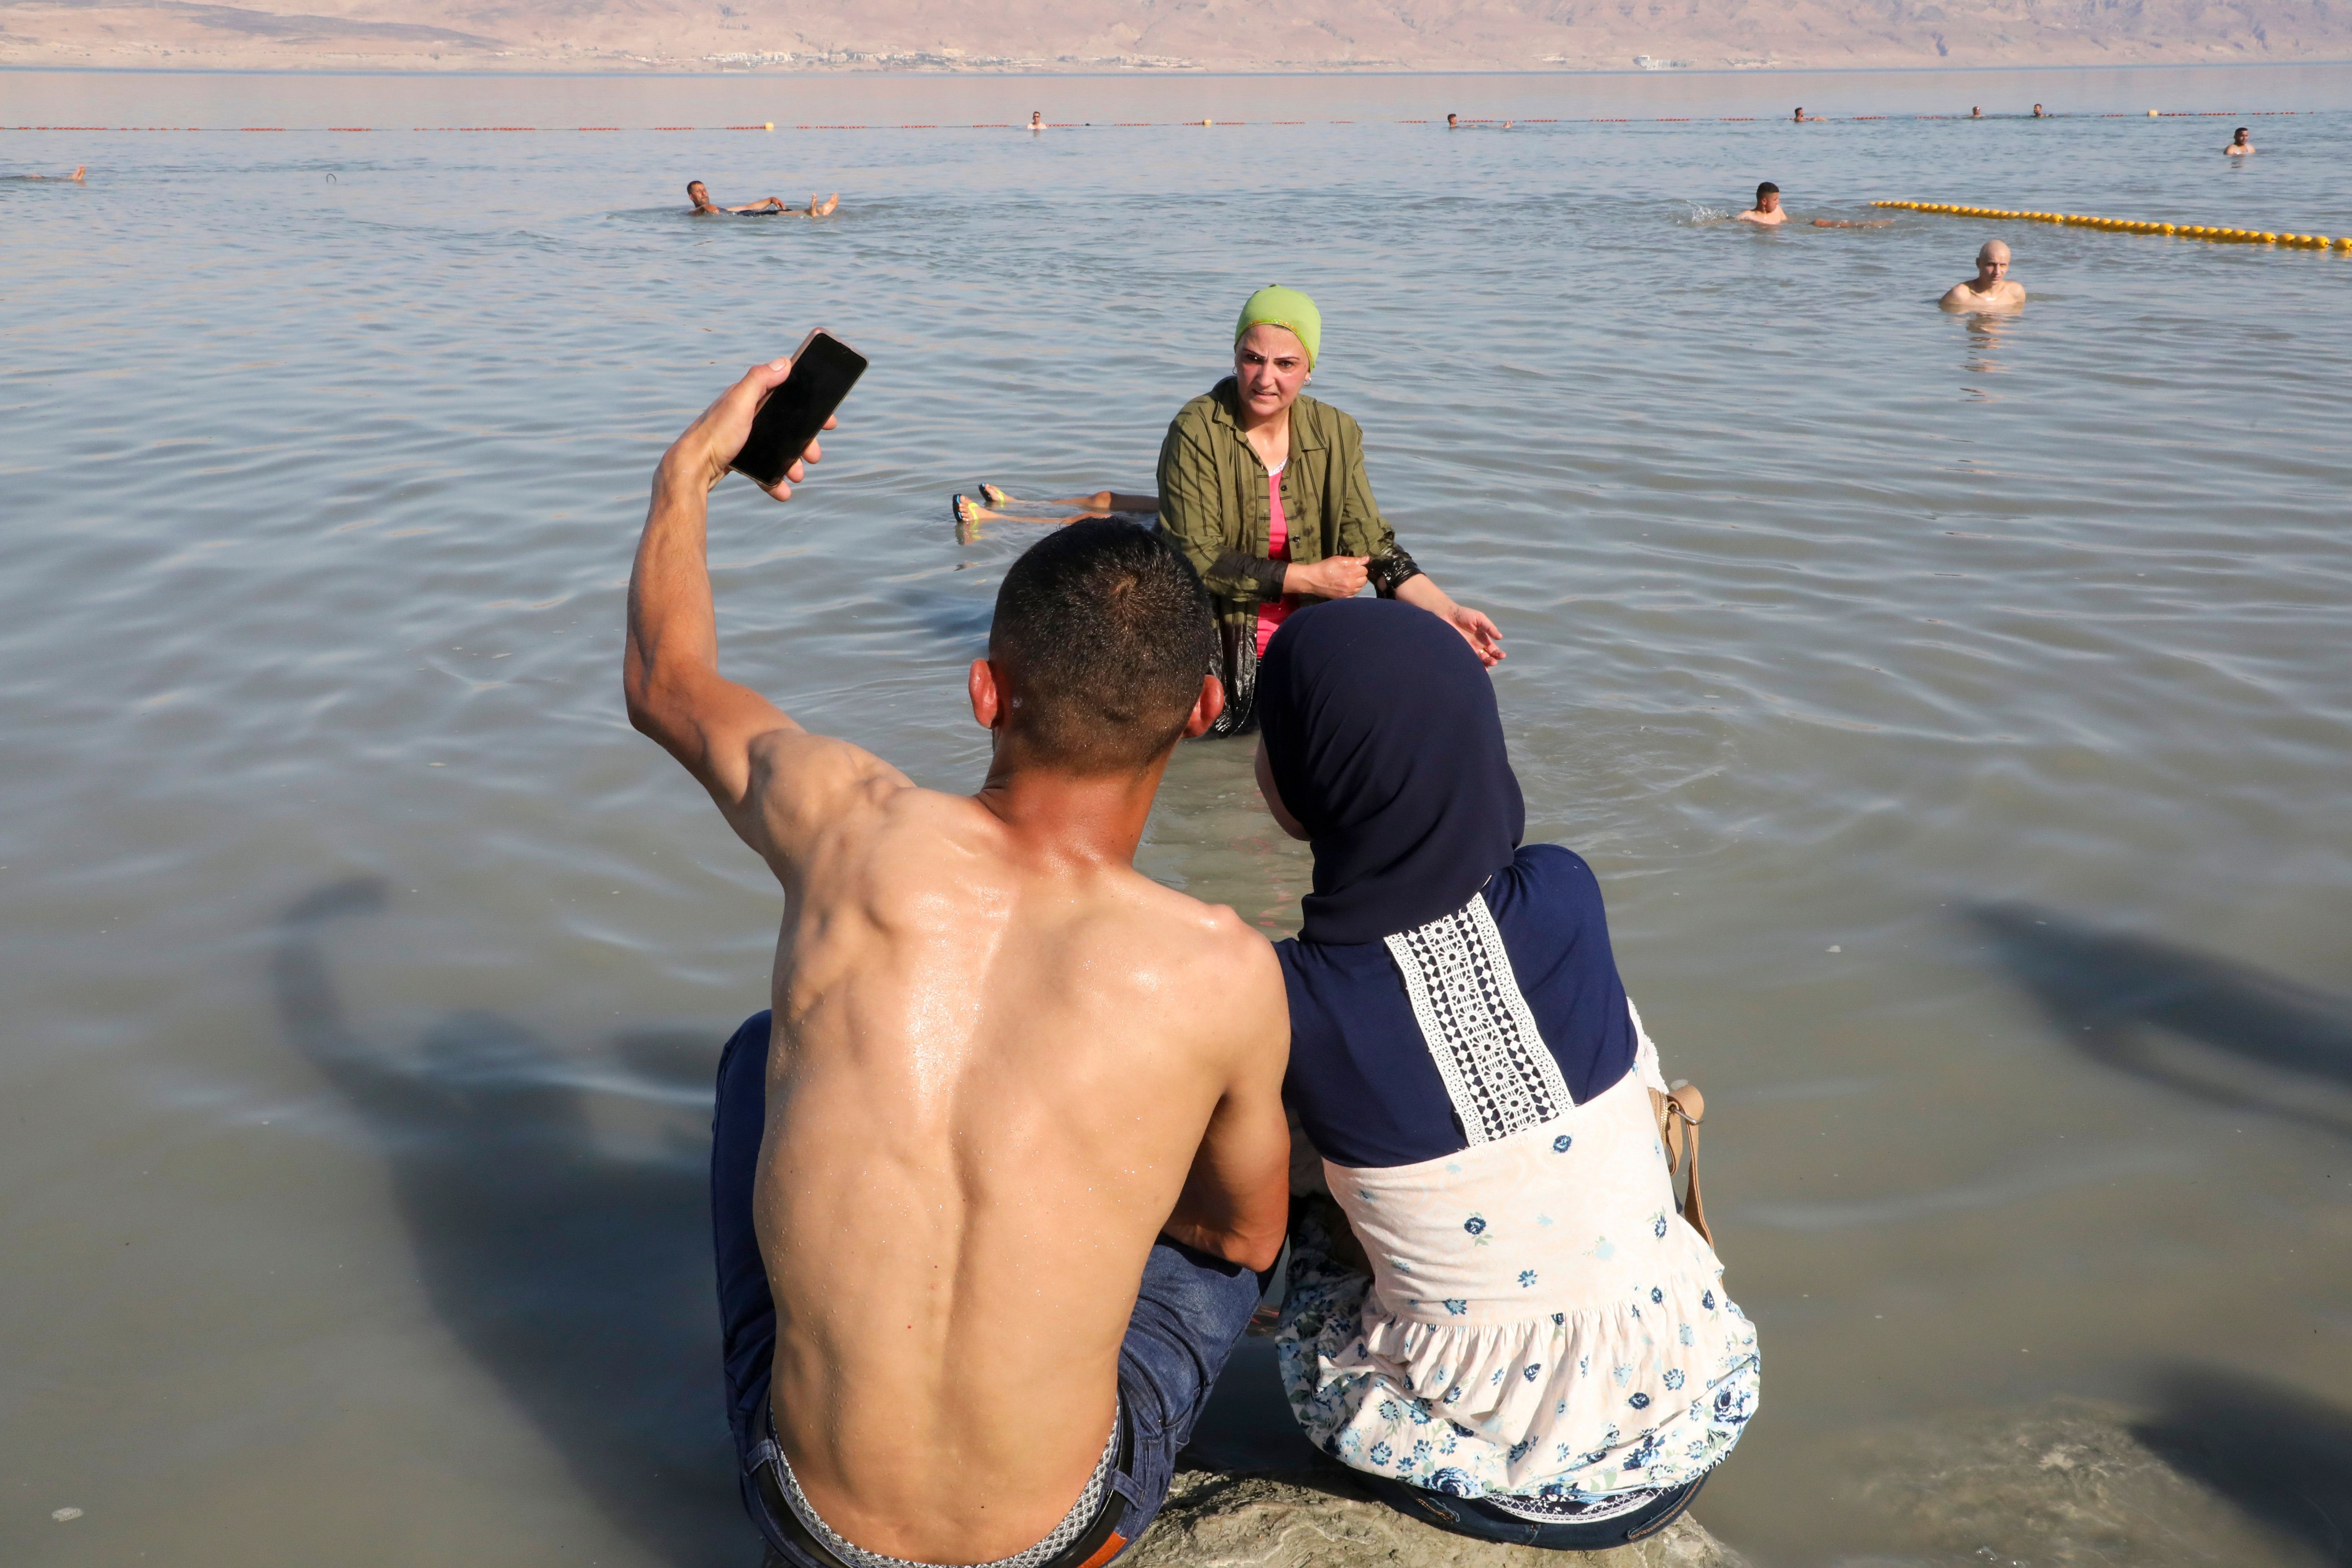 A shirtless man and woman take a selfie while sitting on a beach